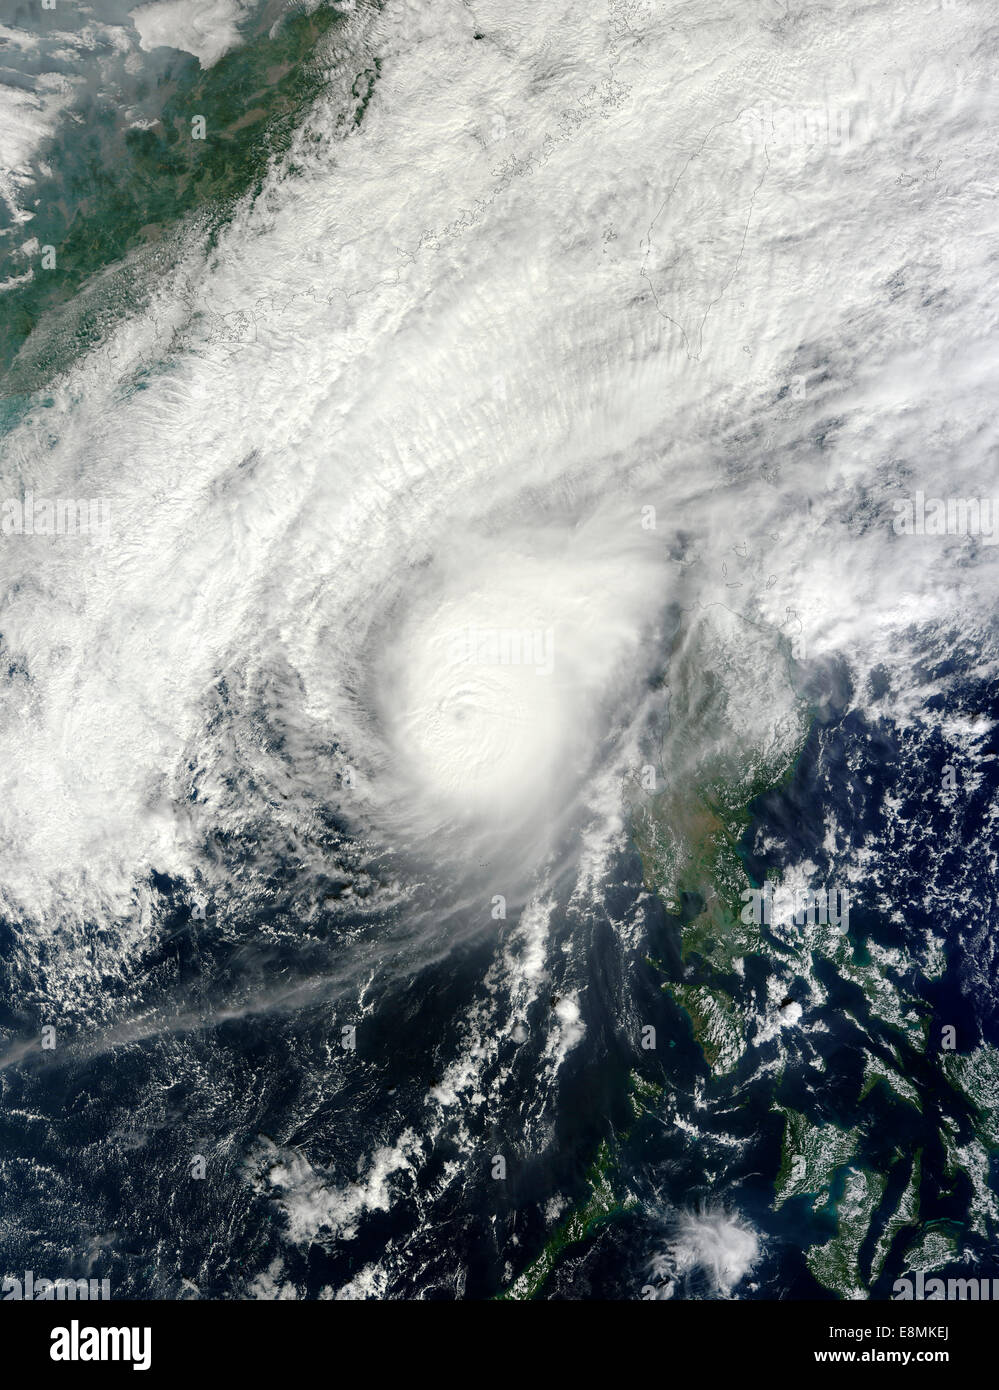 December 8, 2012 - Typhoon Bopha over the South China Sea, just off the coast of the Philippine island of Luzon. Stock Photo